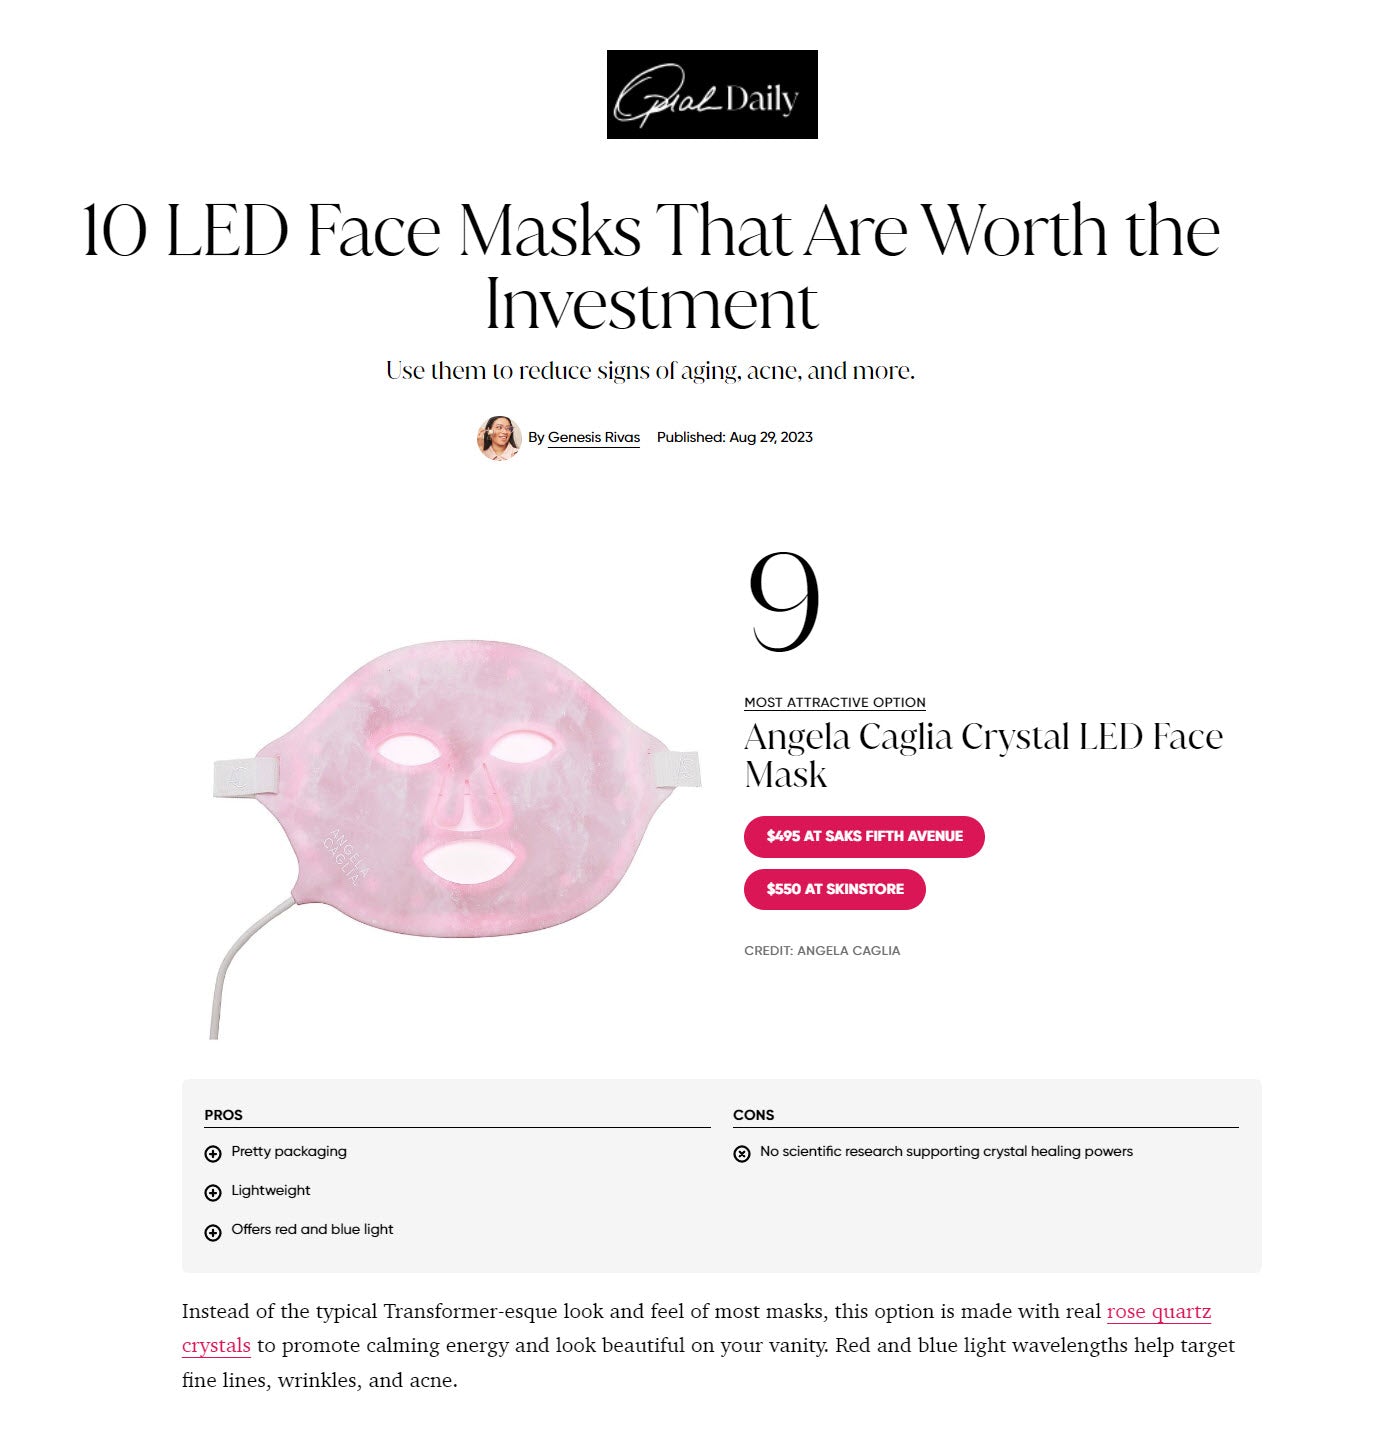 Oprah Daily mention Angela Caglia Crystal LED Mask